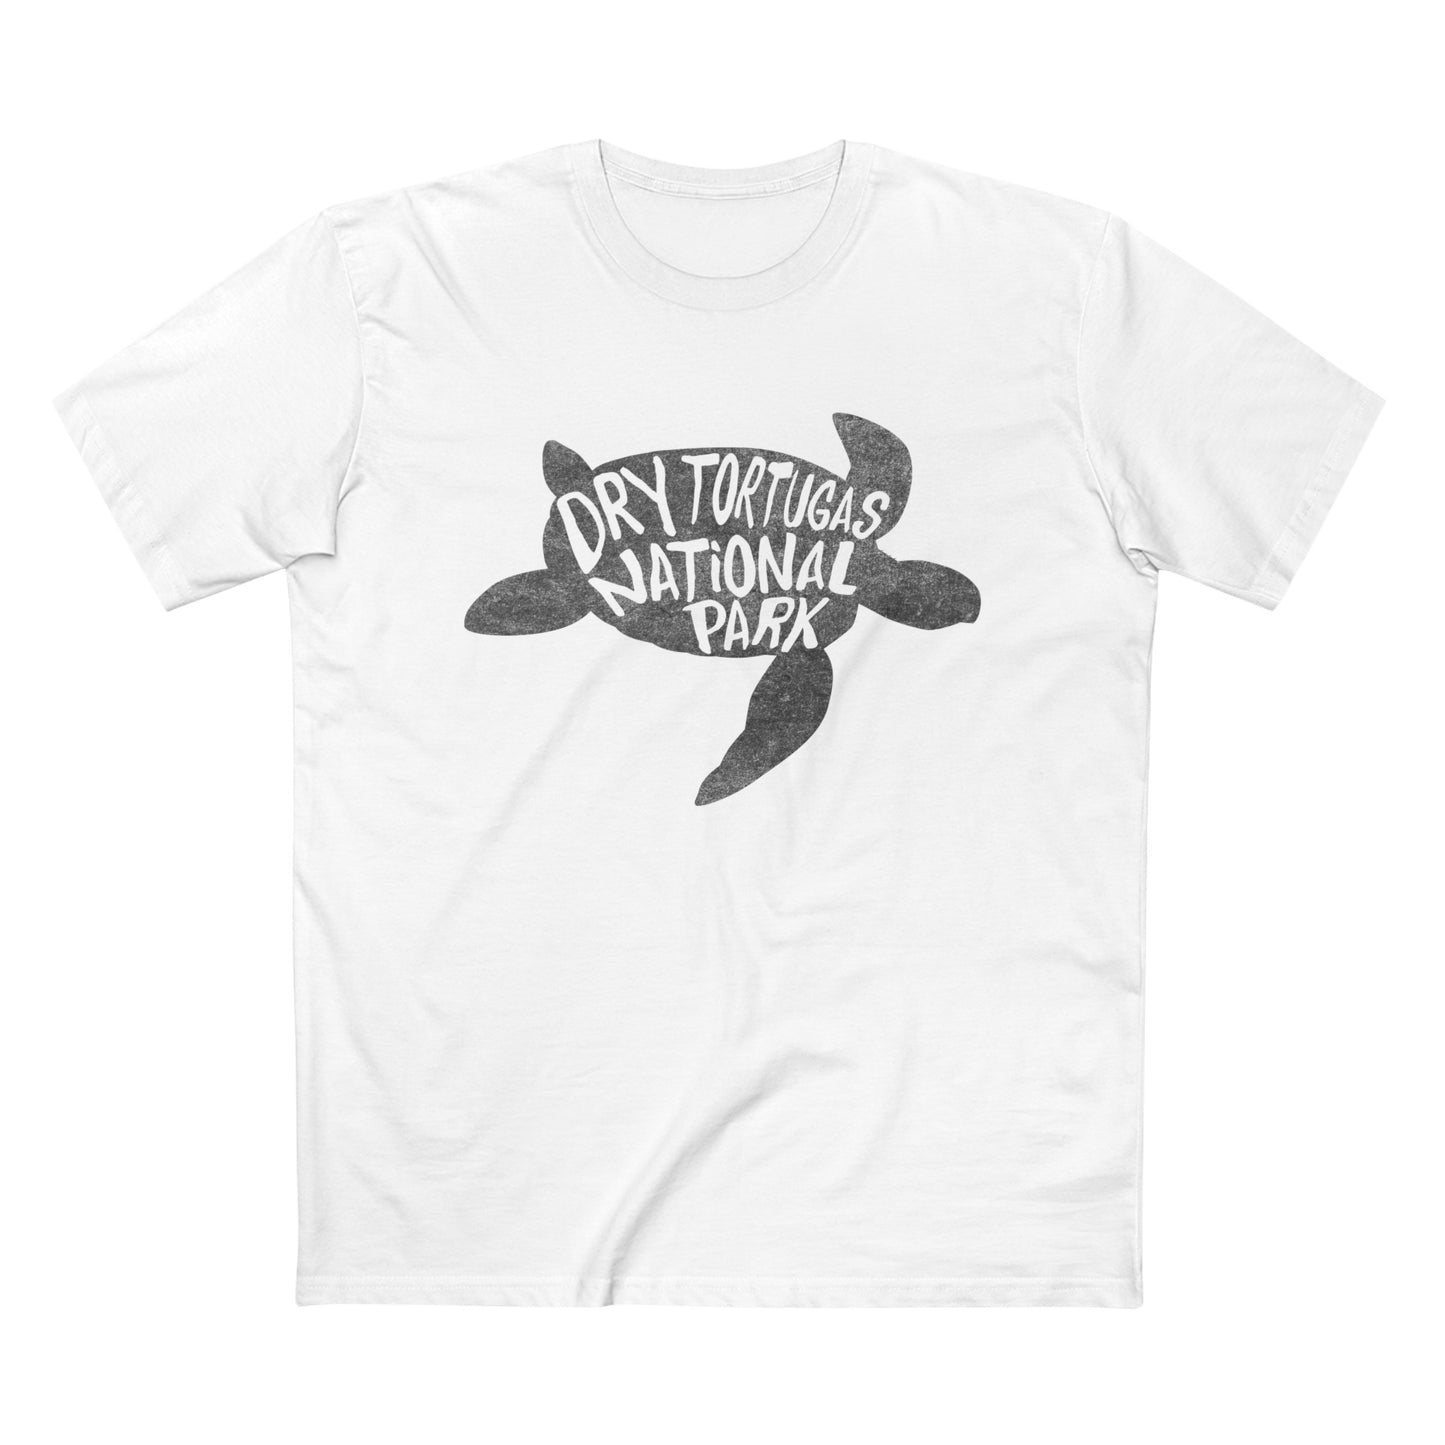 Dry Tortugas National Park T-Shirt - Turtle